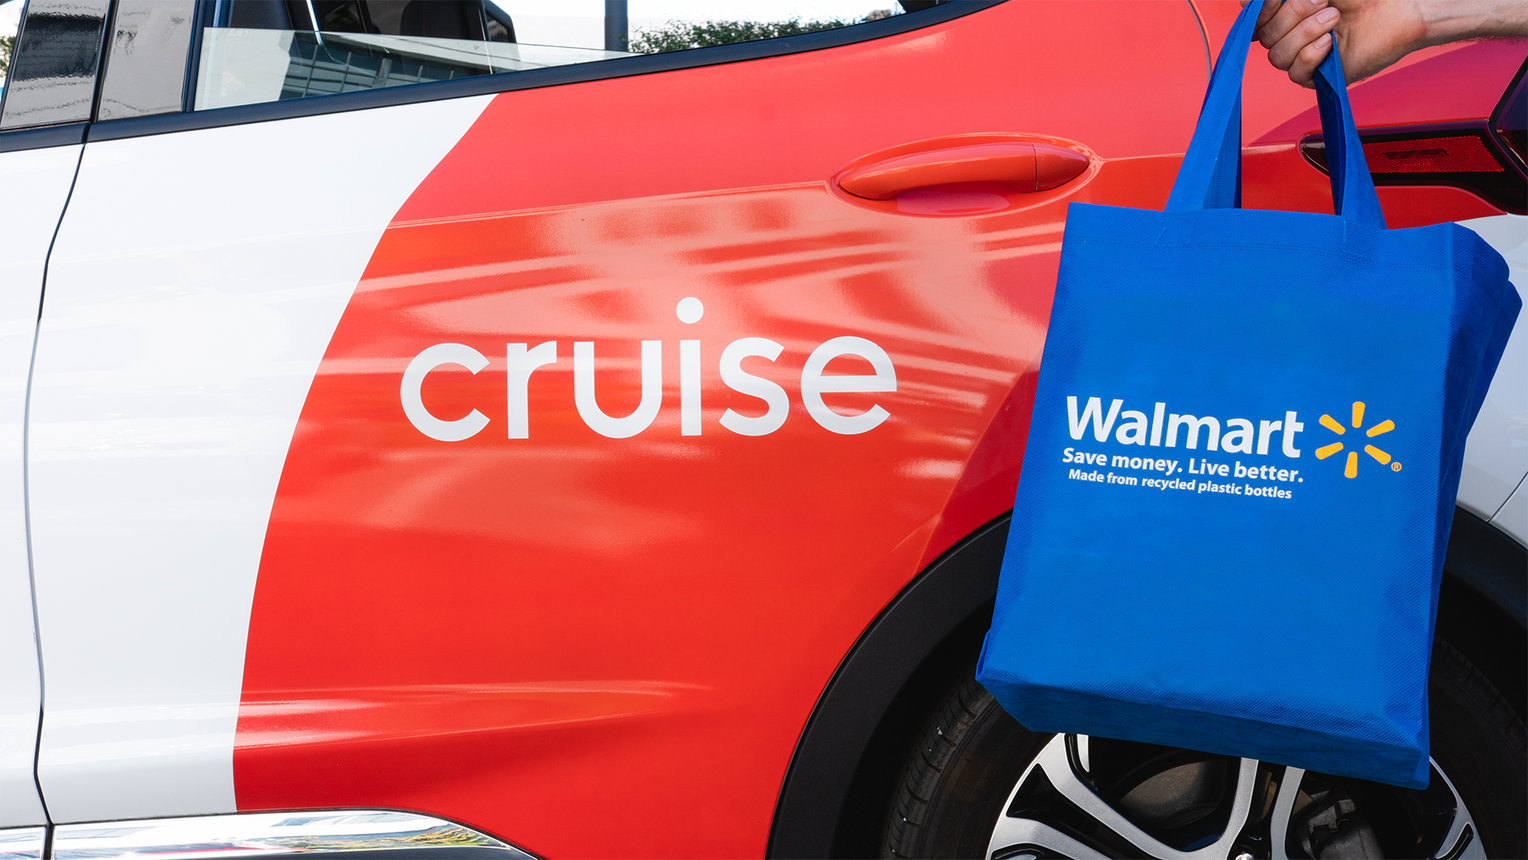 Walmart teams up with autonomous vehicle car company Cruise to deliver groceries